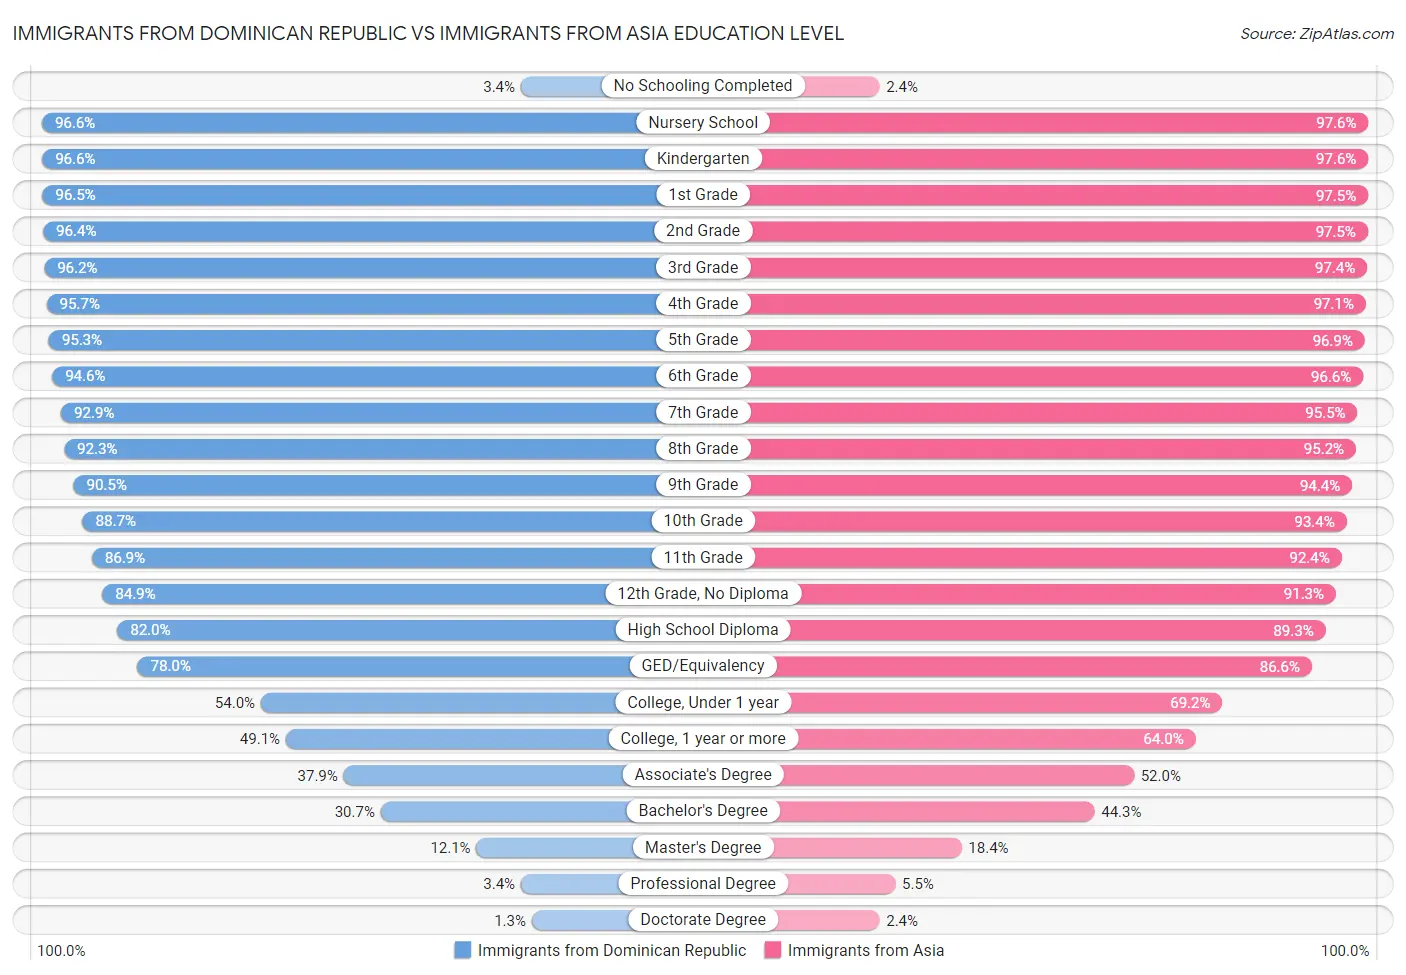 Immigrants from Dominican Republic vs Immigrants from Asia Education Level